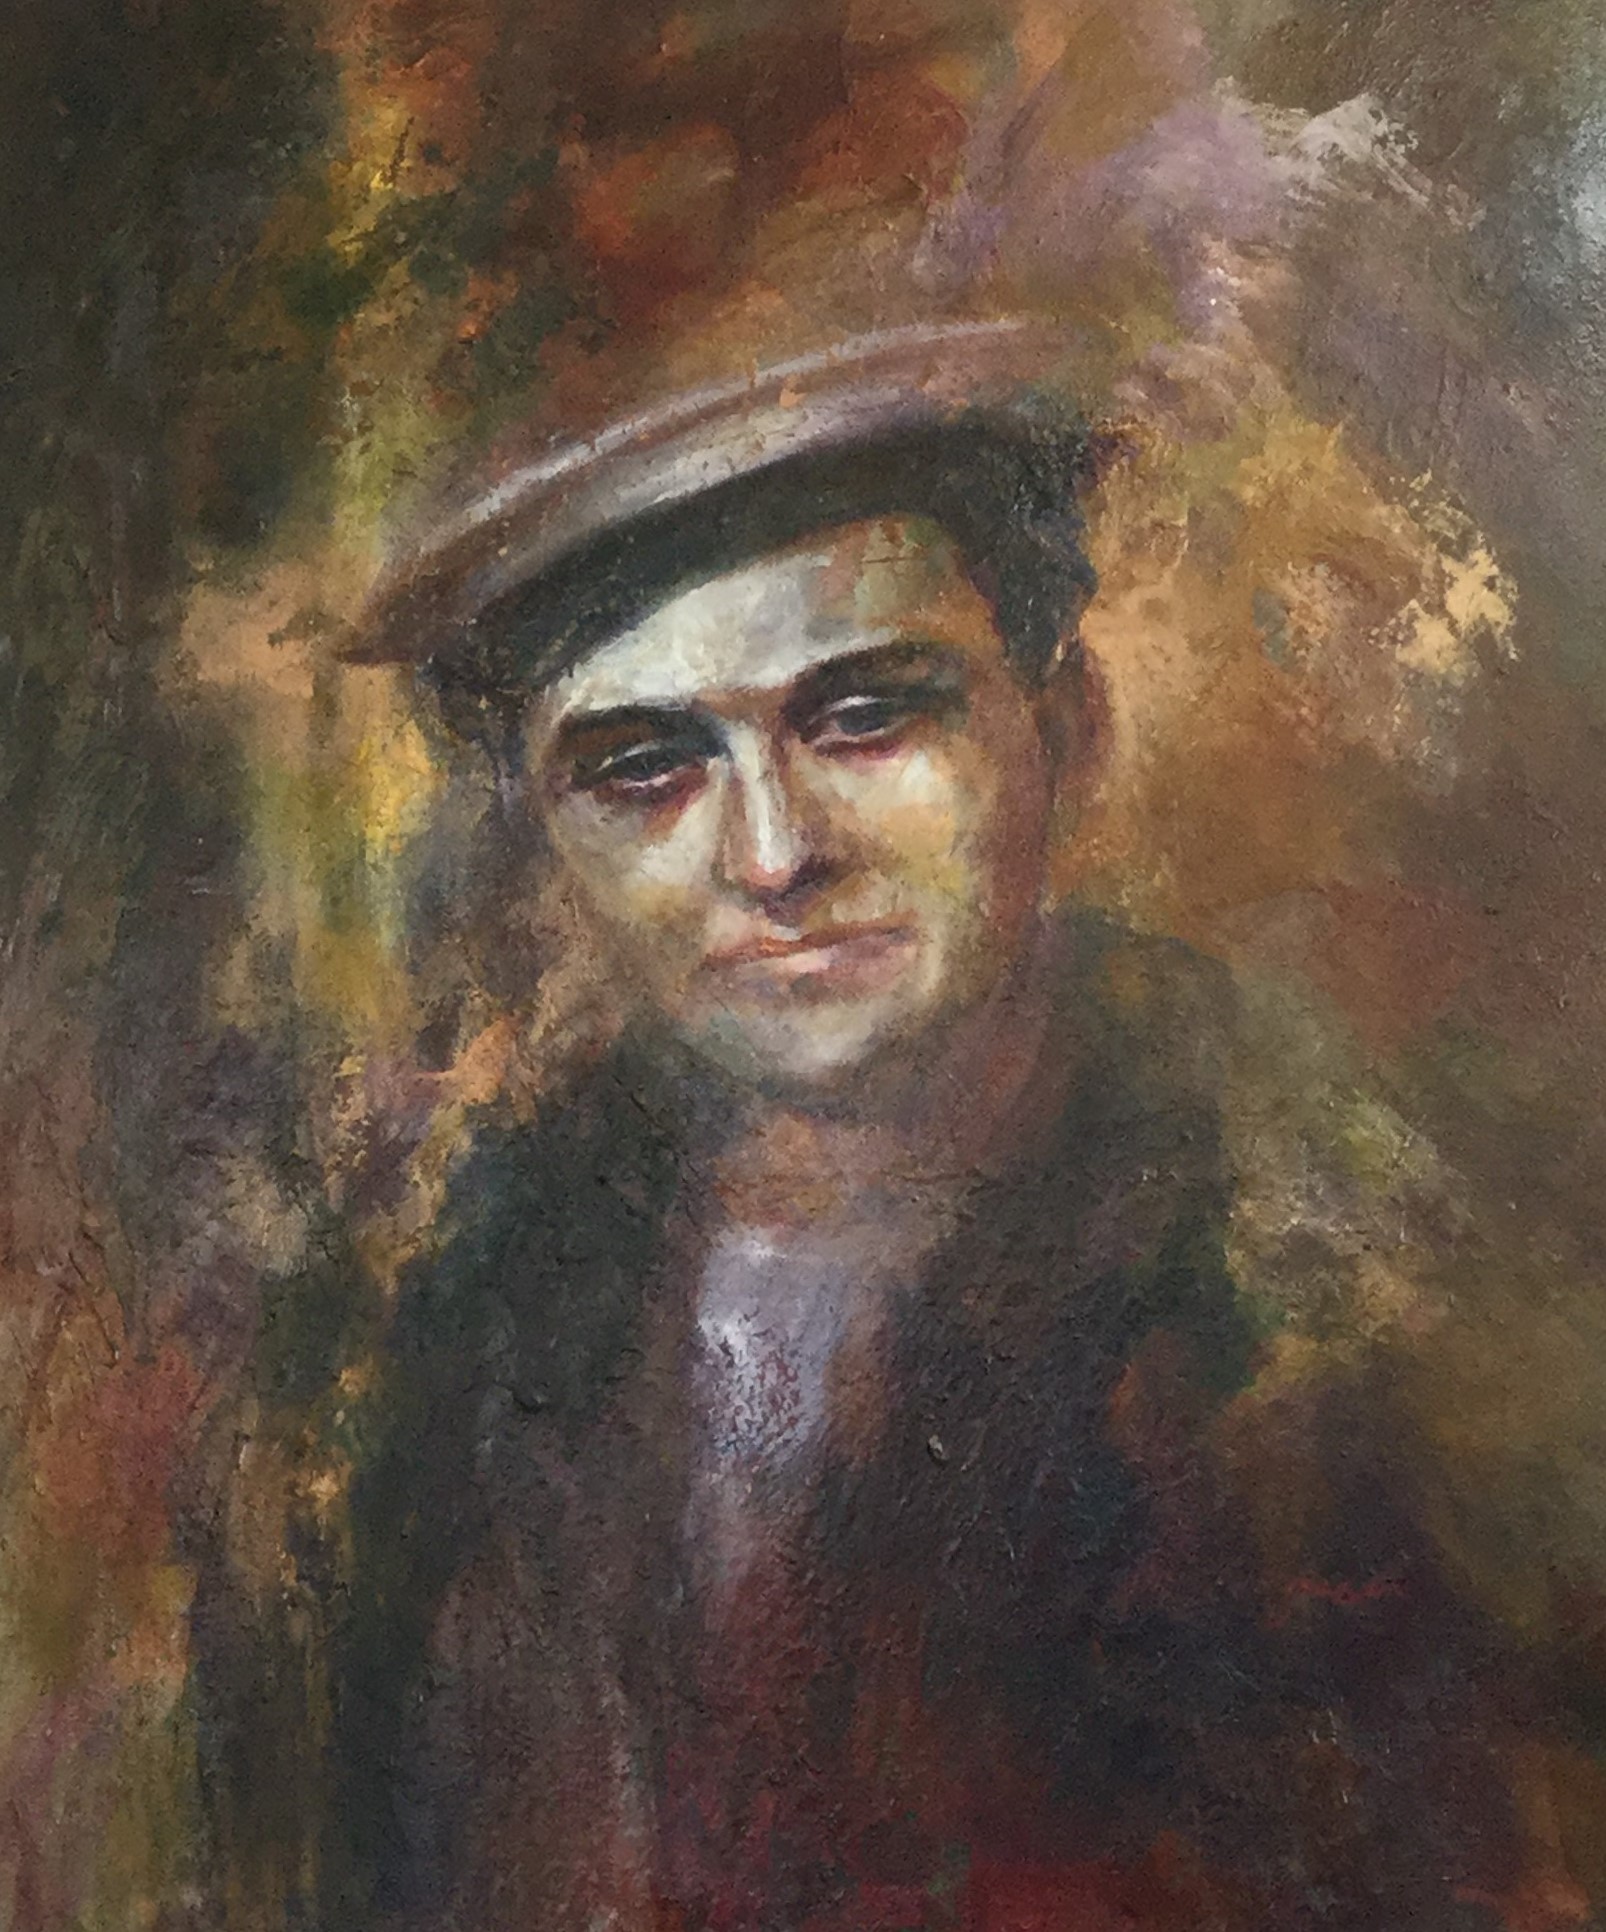 Portrait of man involved in the Iolaire disaster